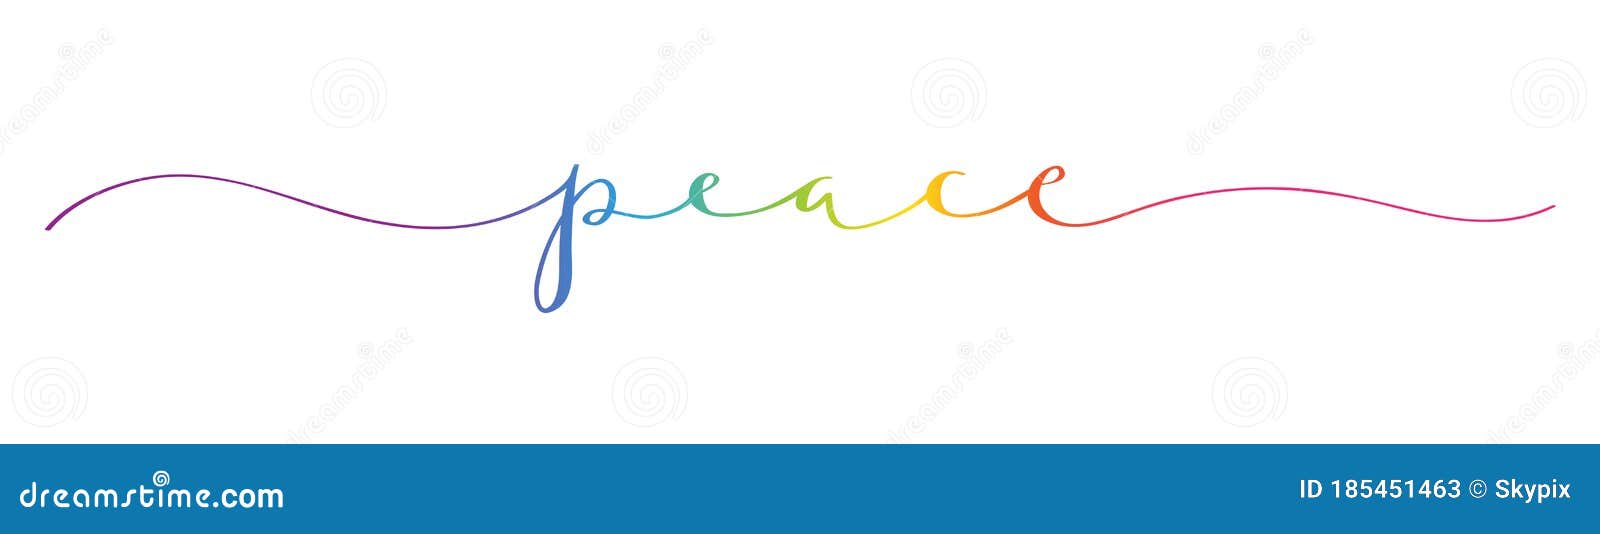 peace colorful brush calligraphy banner